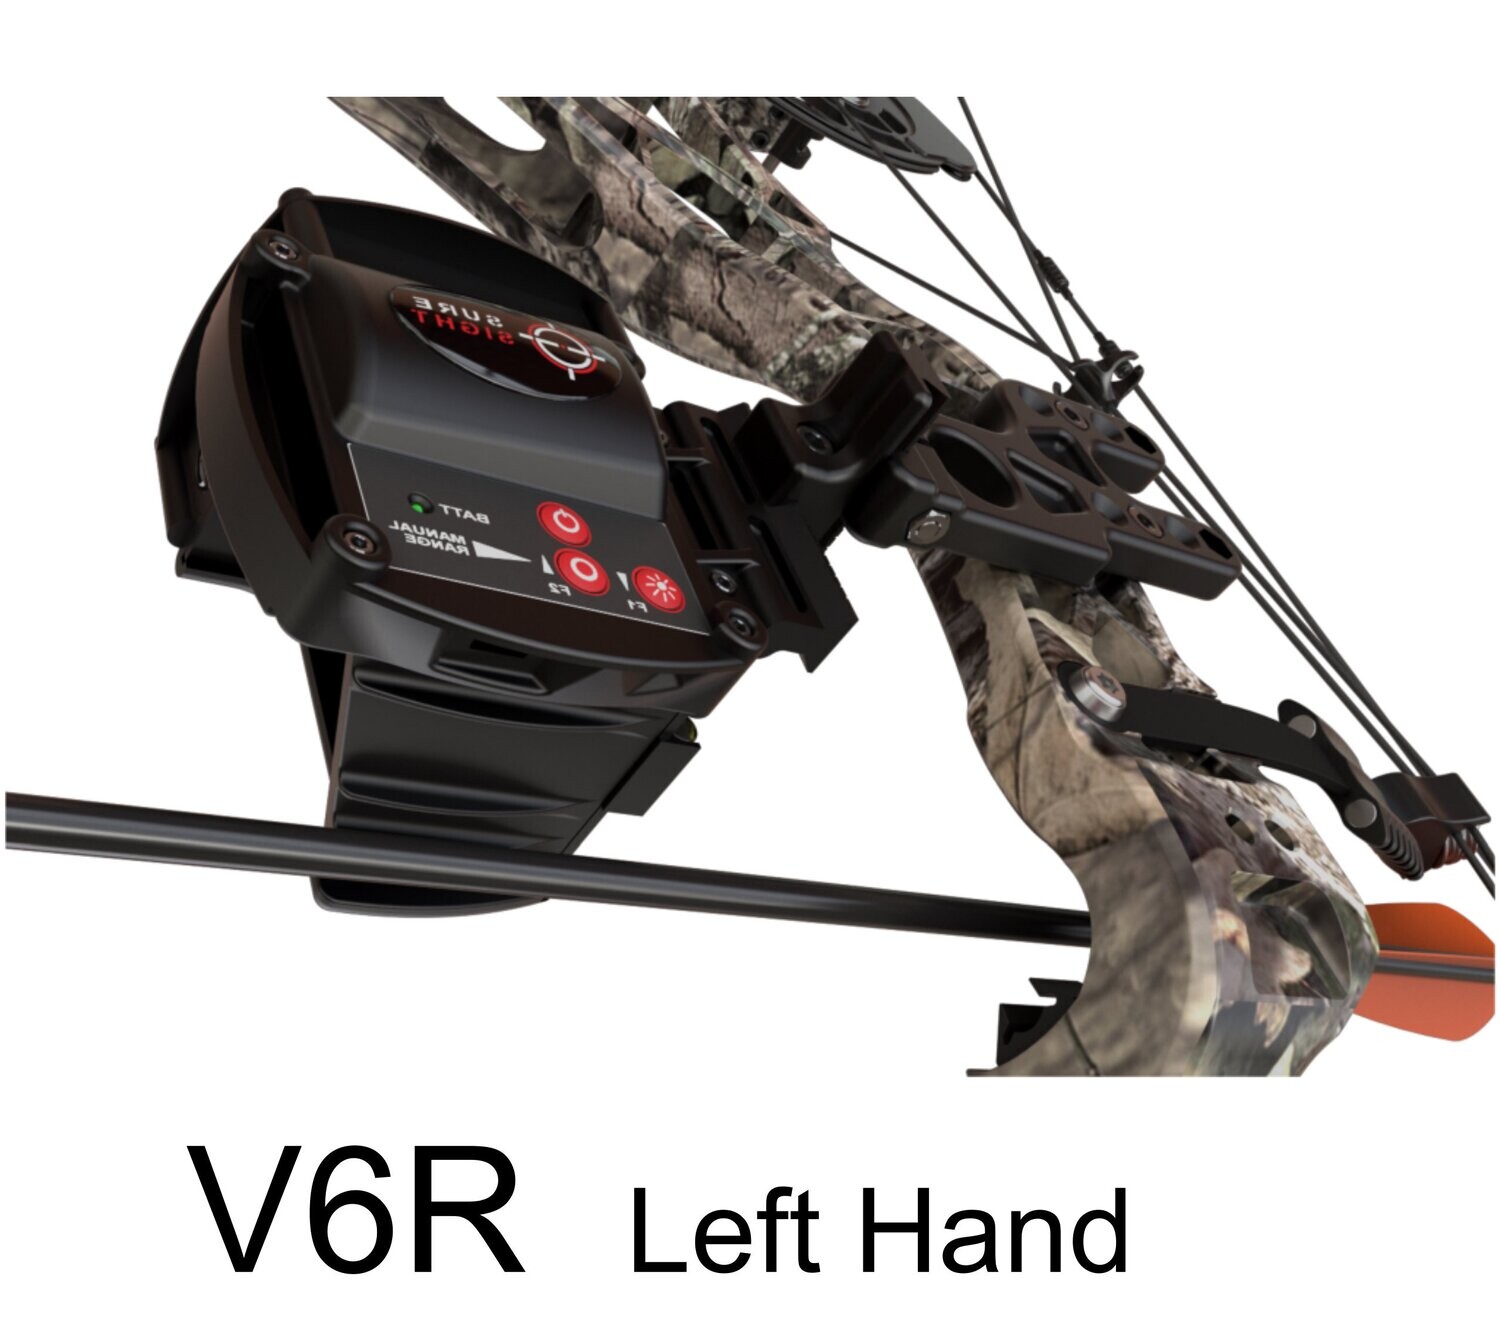 Sure Sight V6R (Left Hand)
Range Finding Automatic Sight
Stock available again February 2023